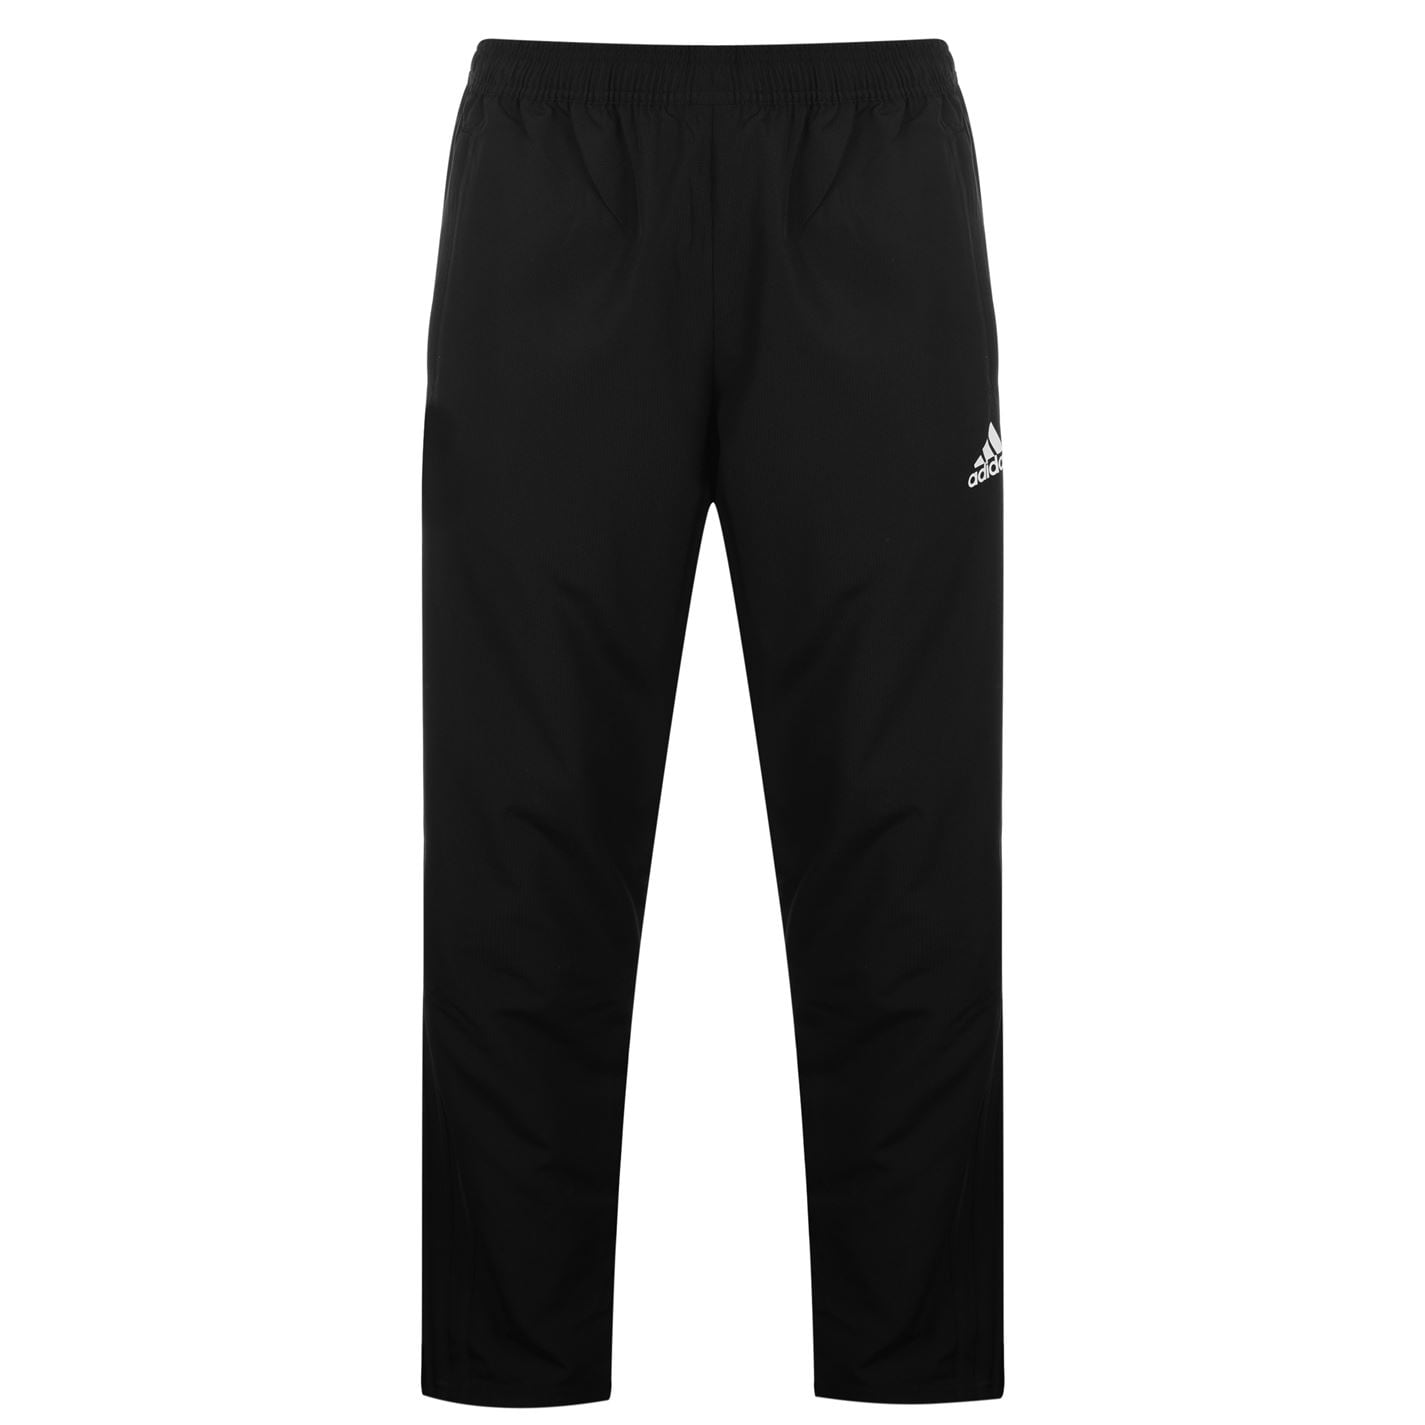 Adidas Woven Tracksuit Bottoms Mens